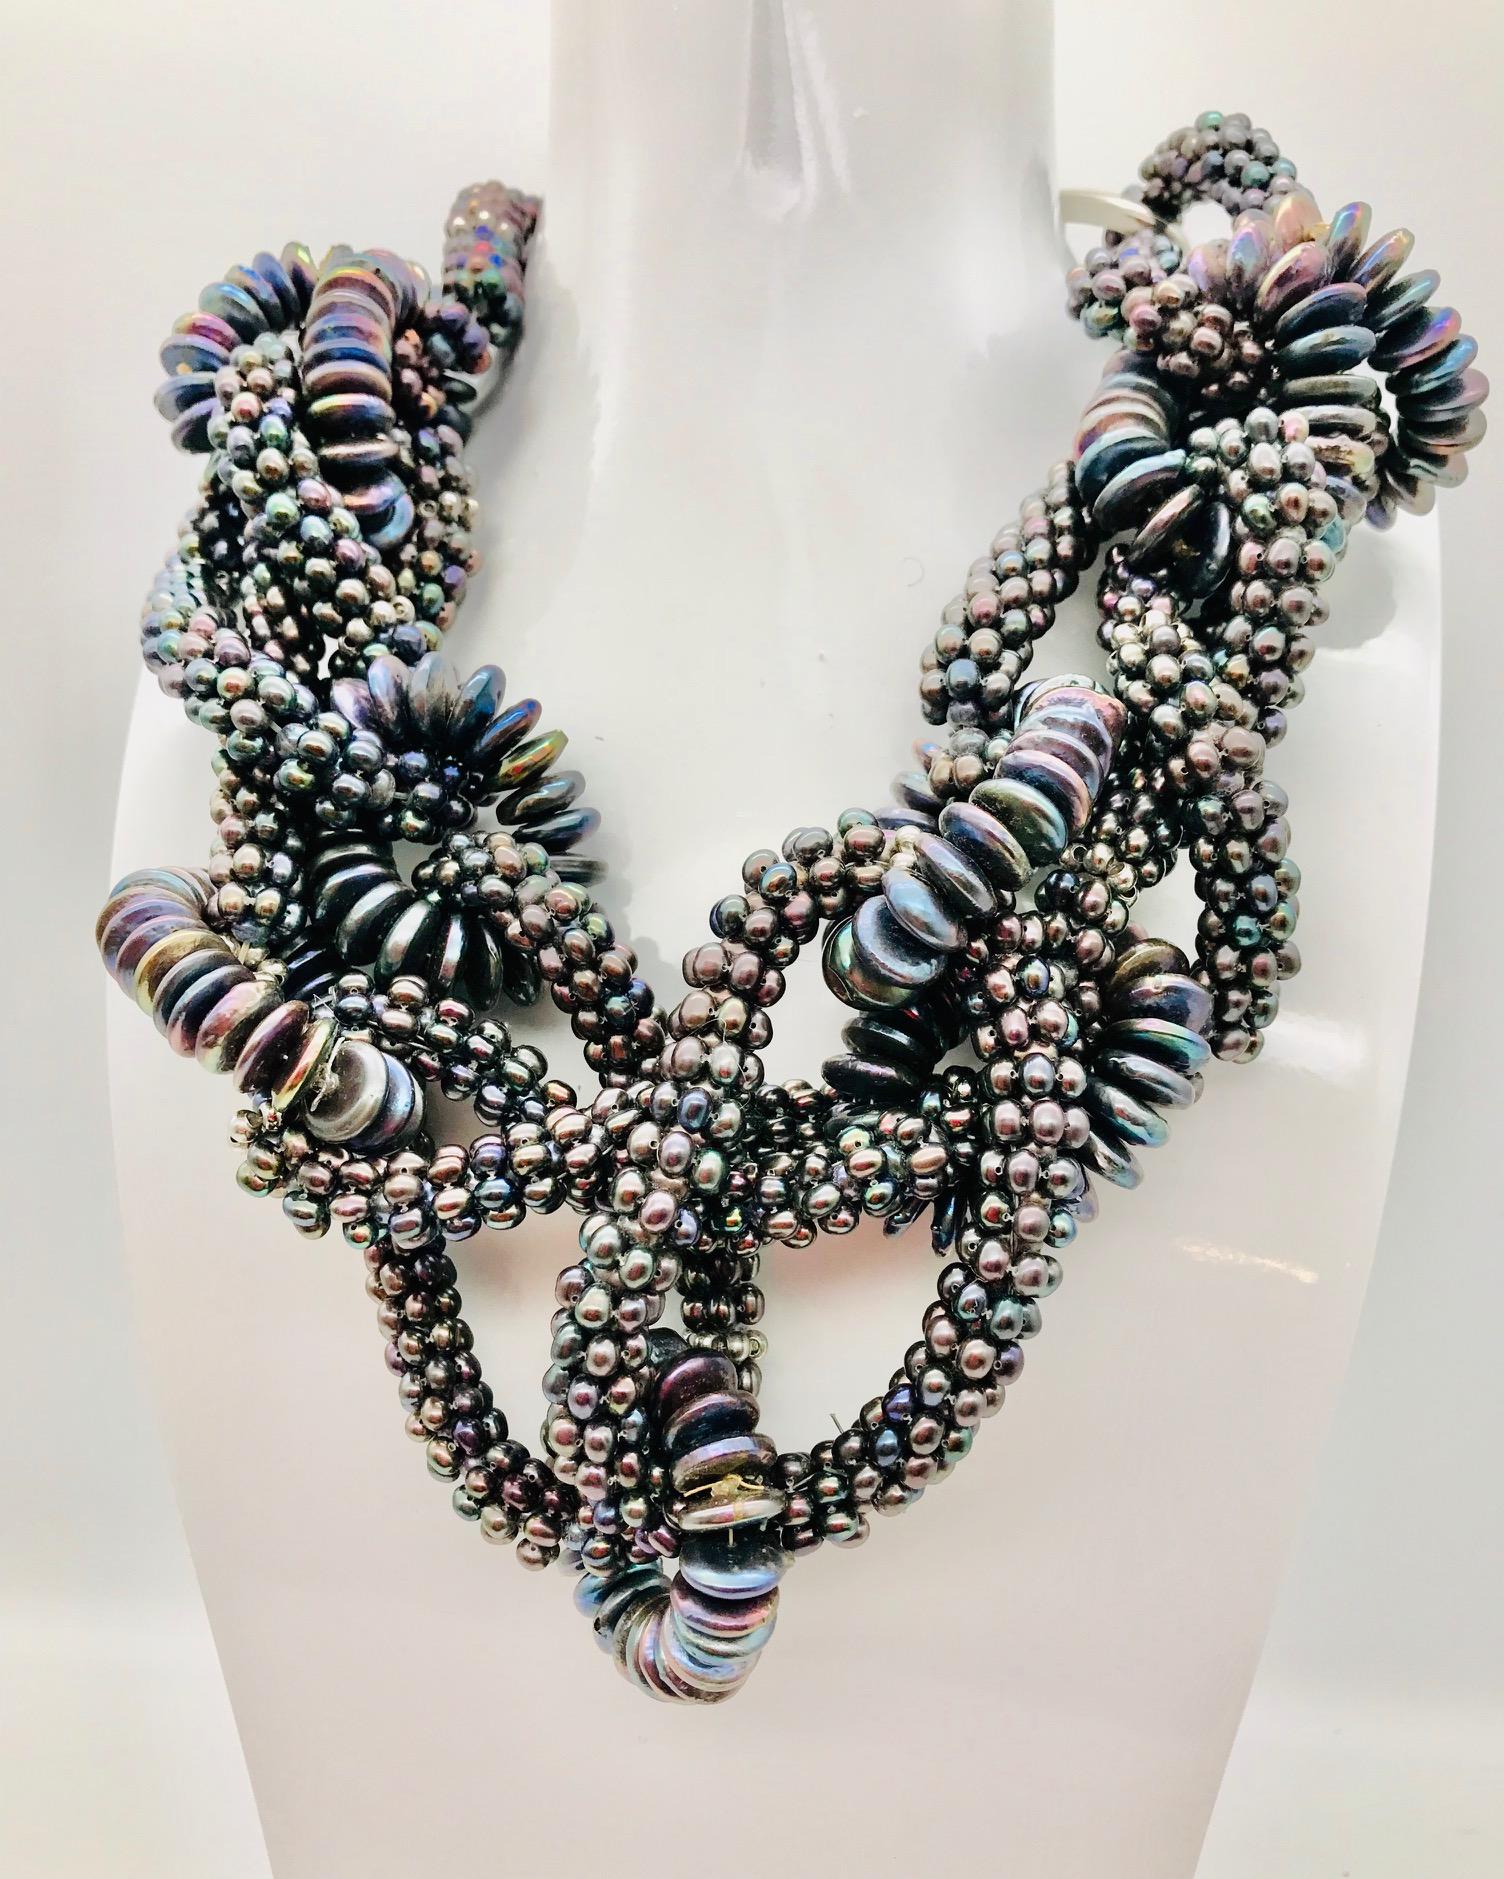  Black Pearl necklace shown is made of number of circular loops joined and composed into a necklace. It was a very labor intensive design because the  tiny 1/8' dark fresh water round pearls made into loops and held together by 1/4